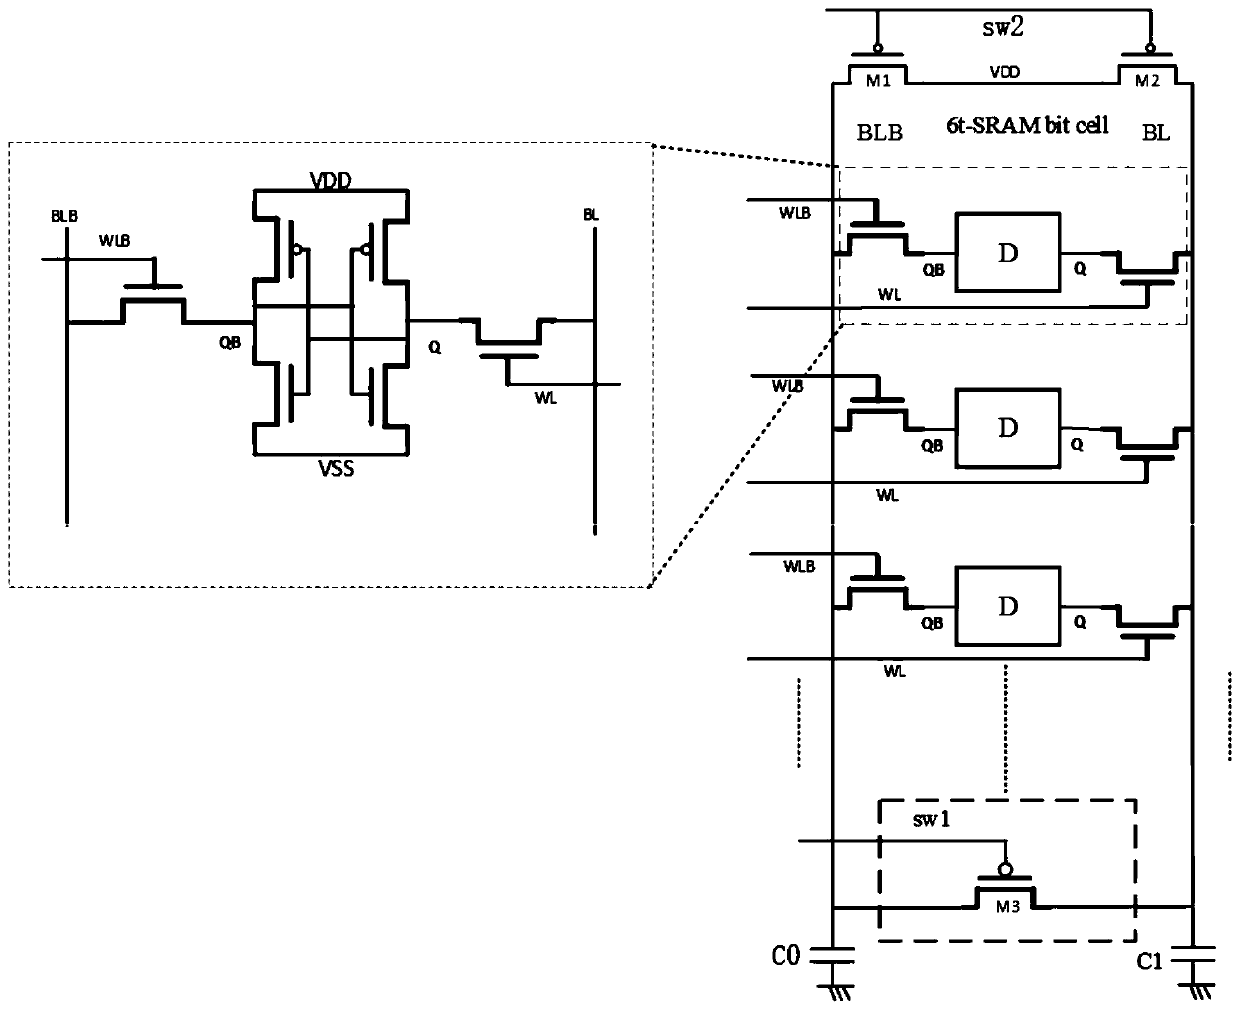 Double-word-line 6TSRAM unit circuit for binary neural network